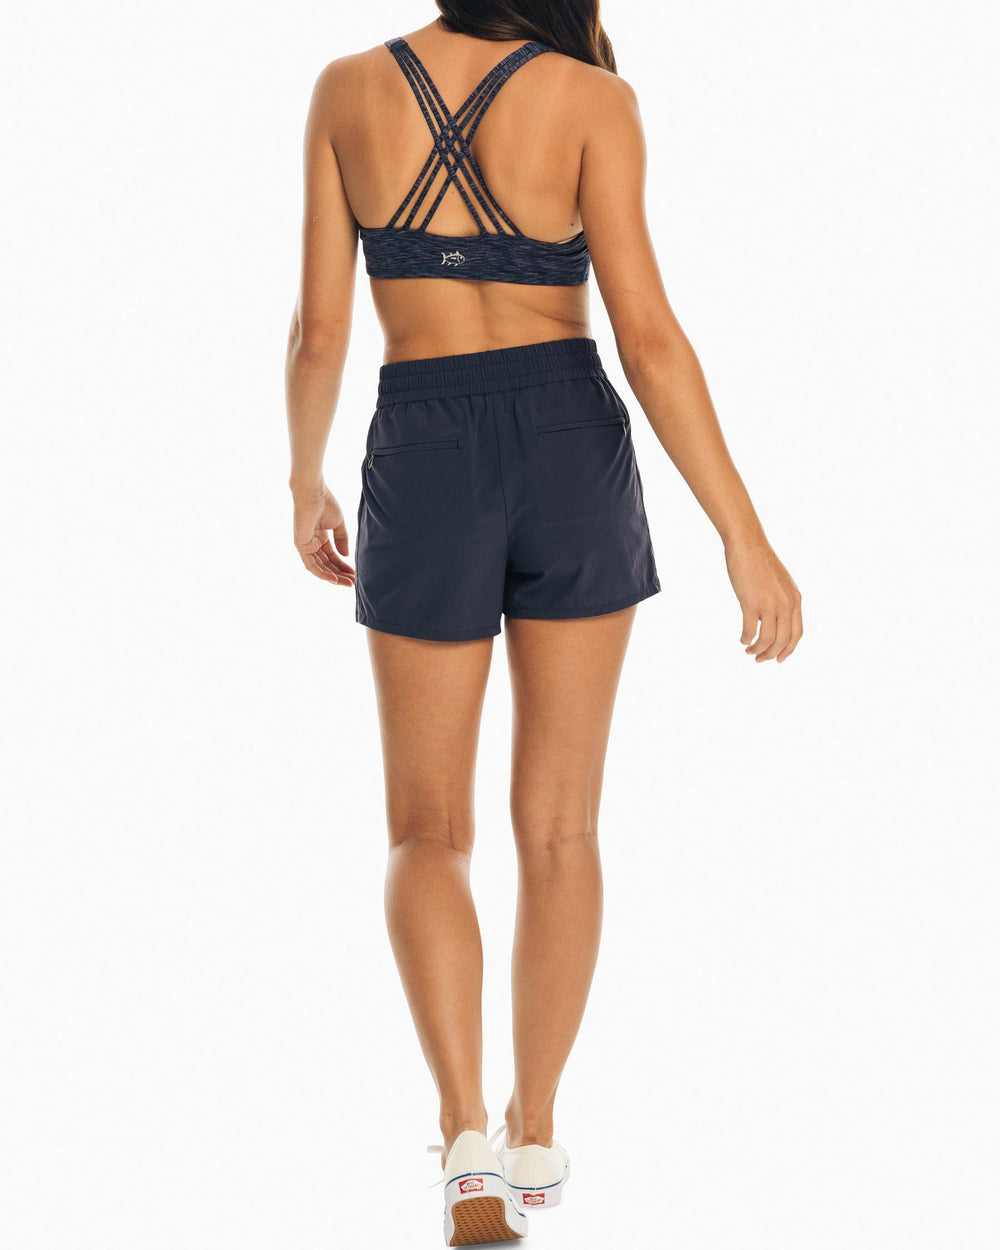 The back view of the Women's Navy Coastal Performance Solid Short by Southern Tide - Nautical Navy